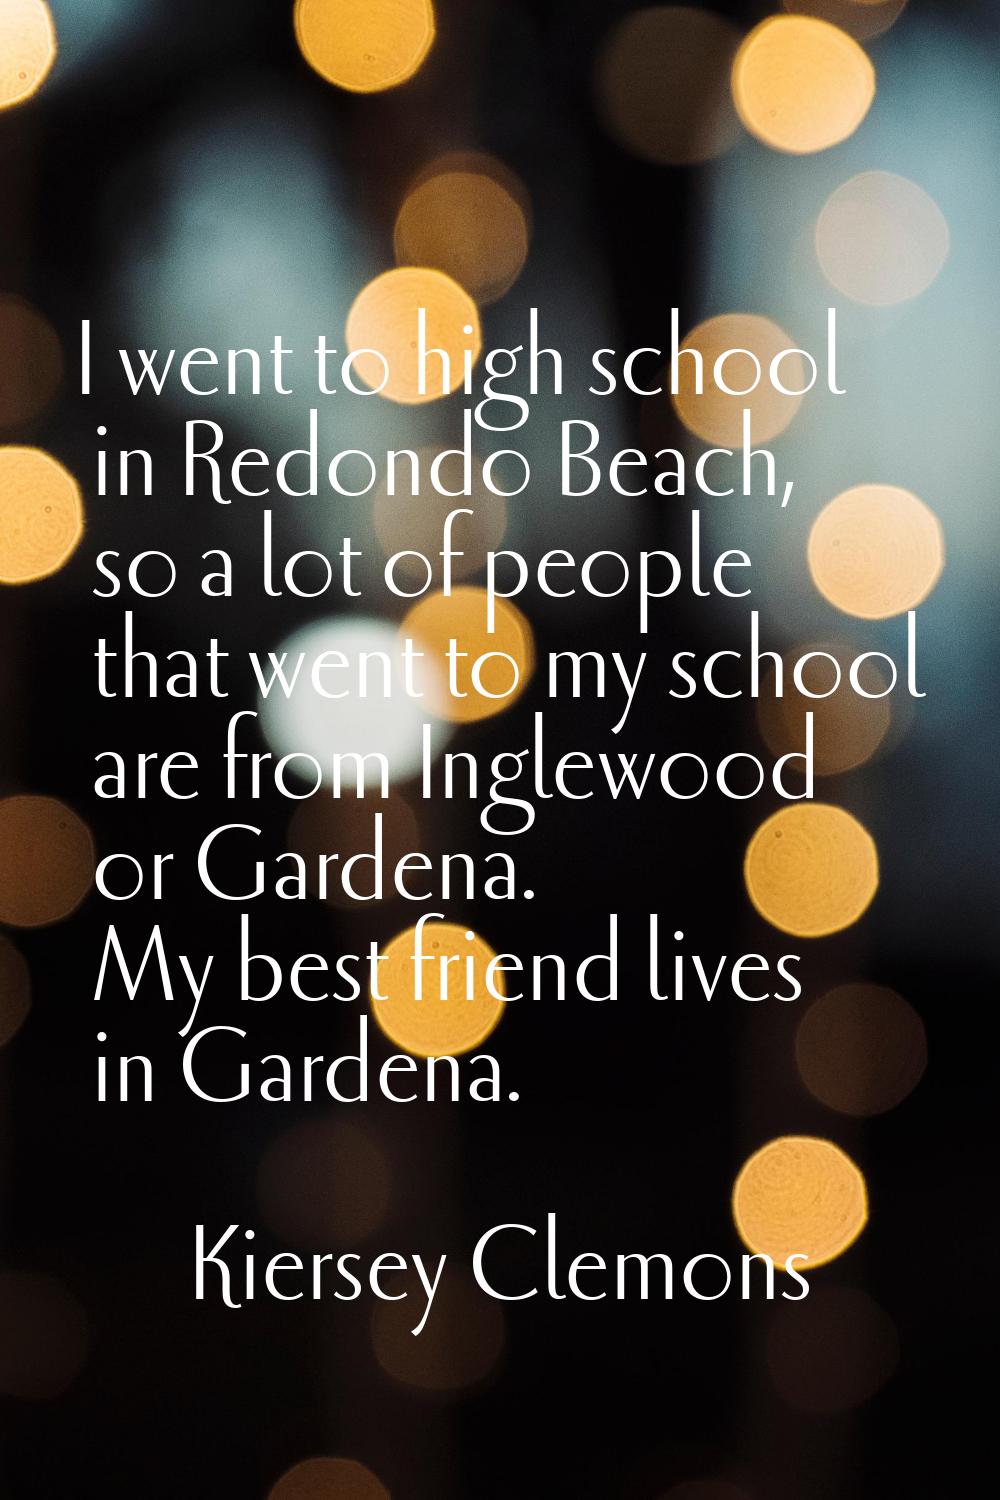 I went to high school in Redondo Beach, so a lot of people that went to my school are from Inglewoo